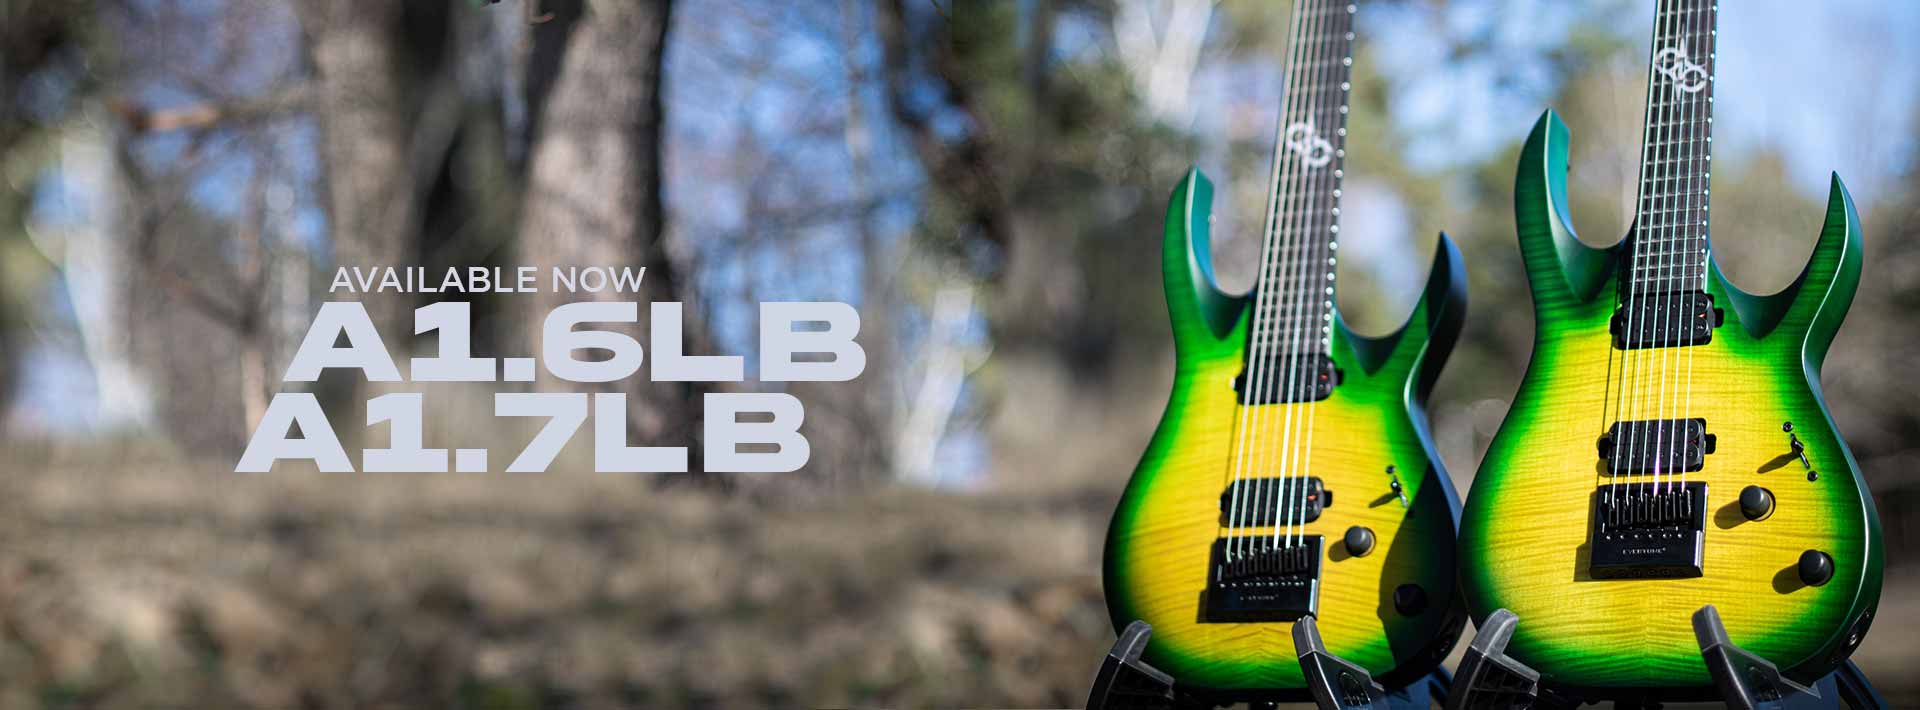 Welcome to the SOLAR GUITARS website !